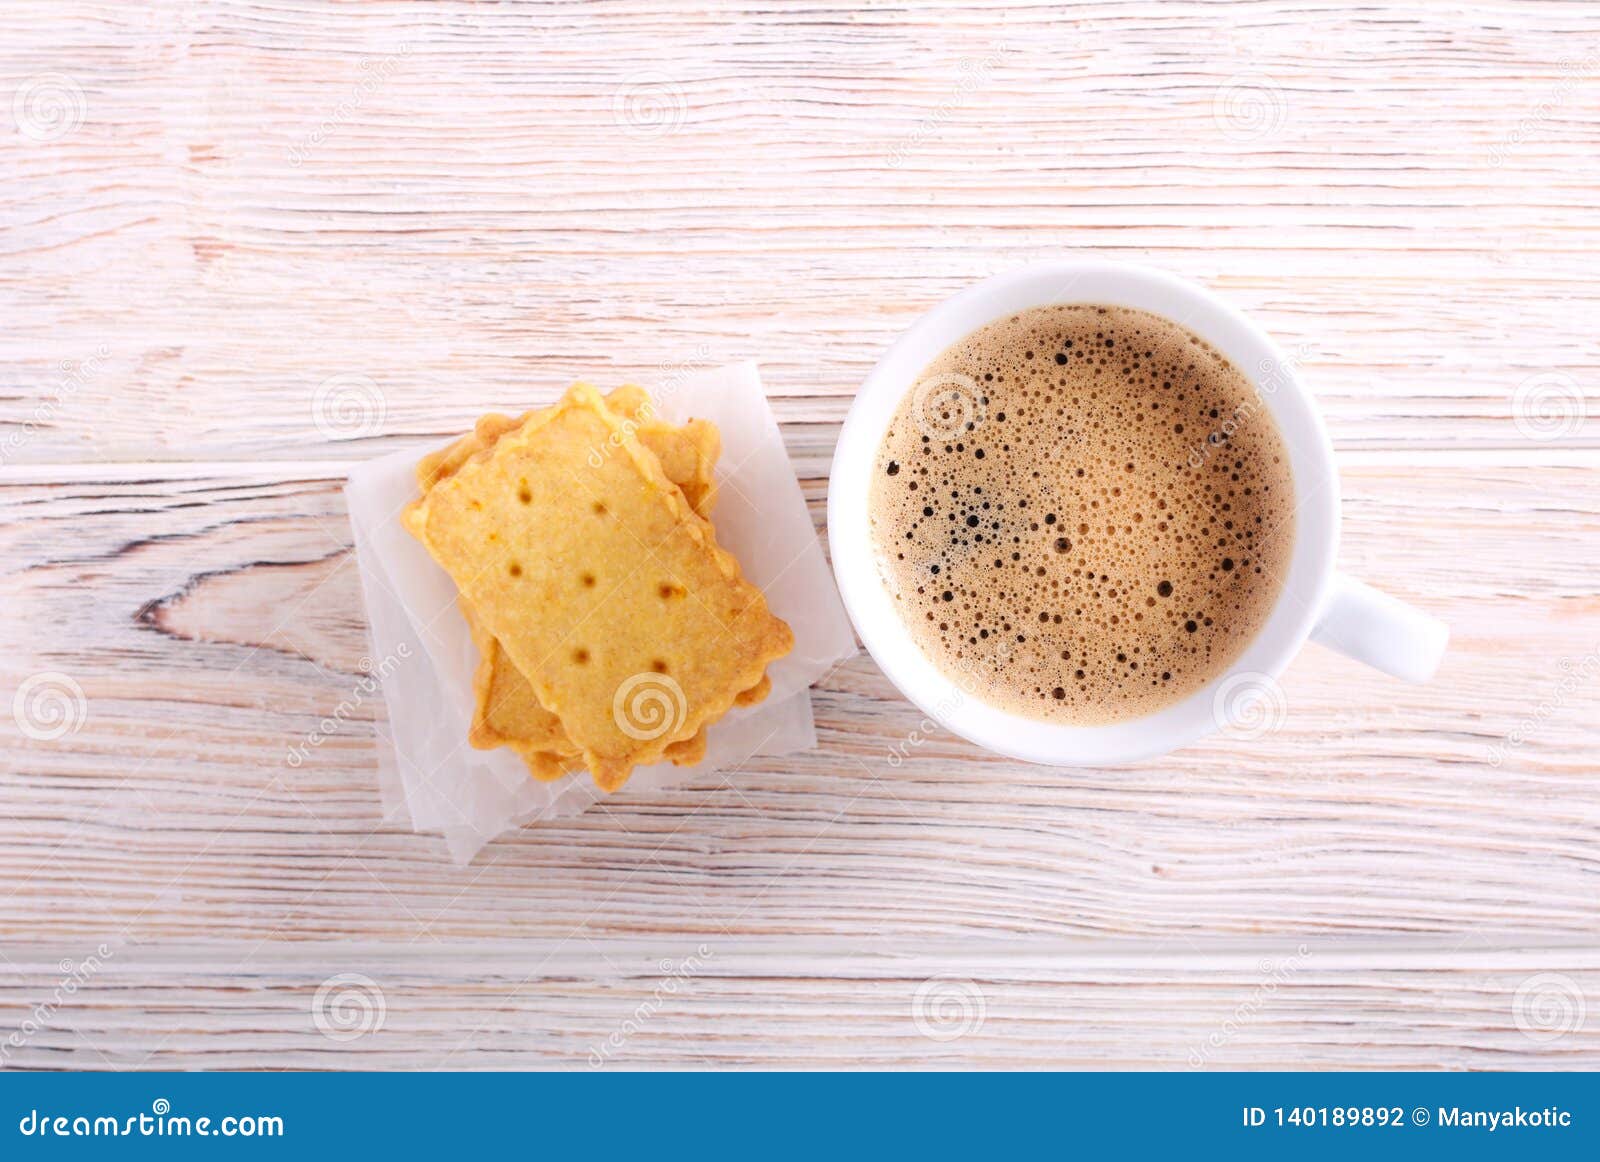 Homemade Crackers and Cup of Coffee Stock Photo - Image of brunch, food ...